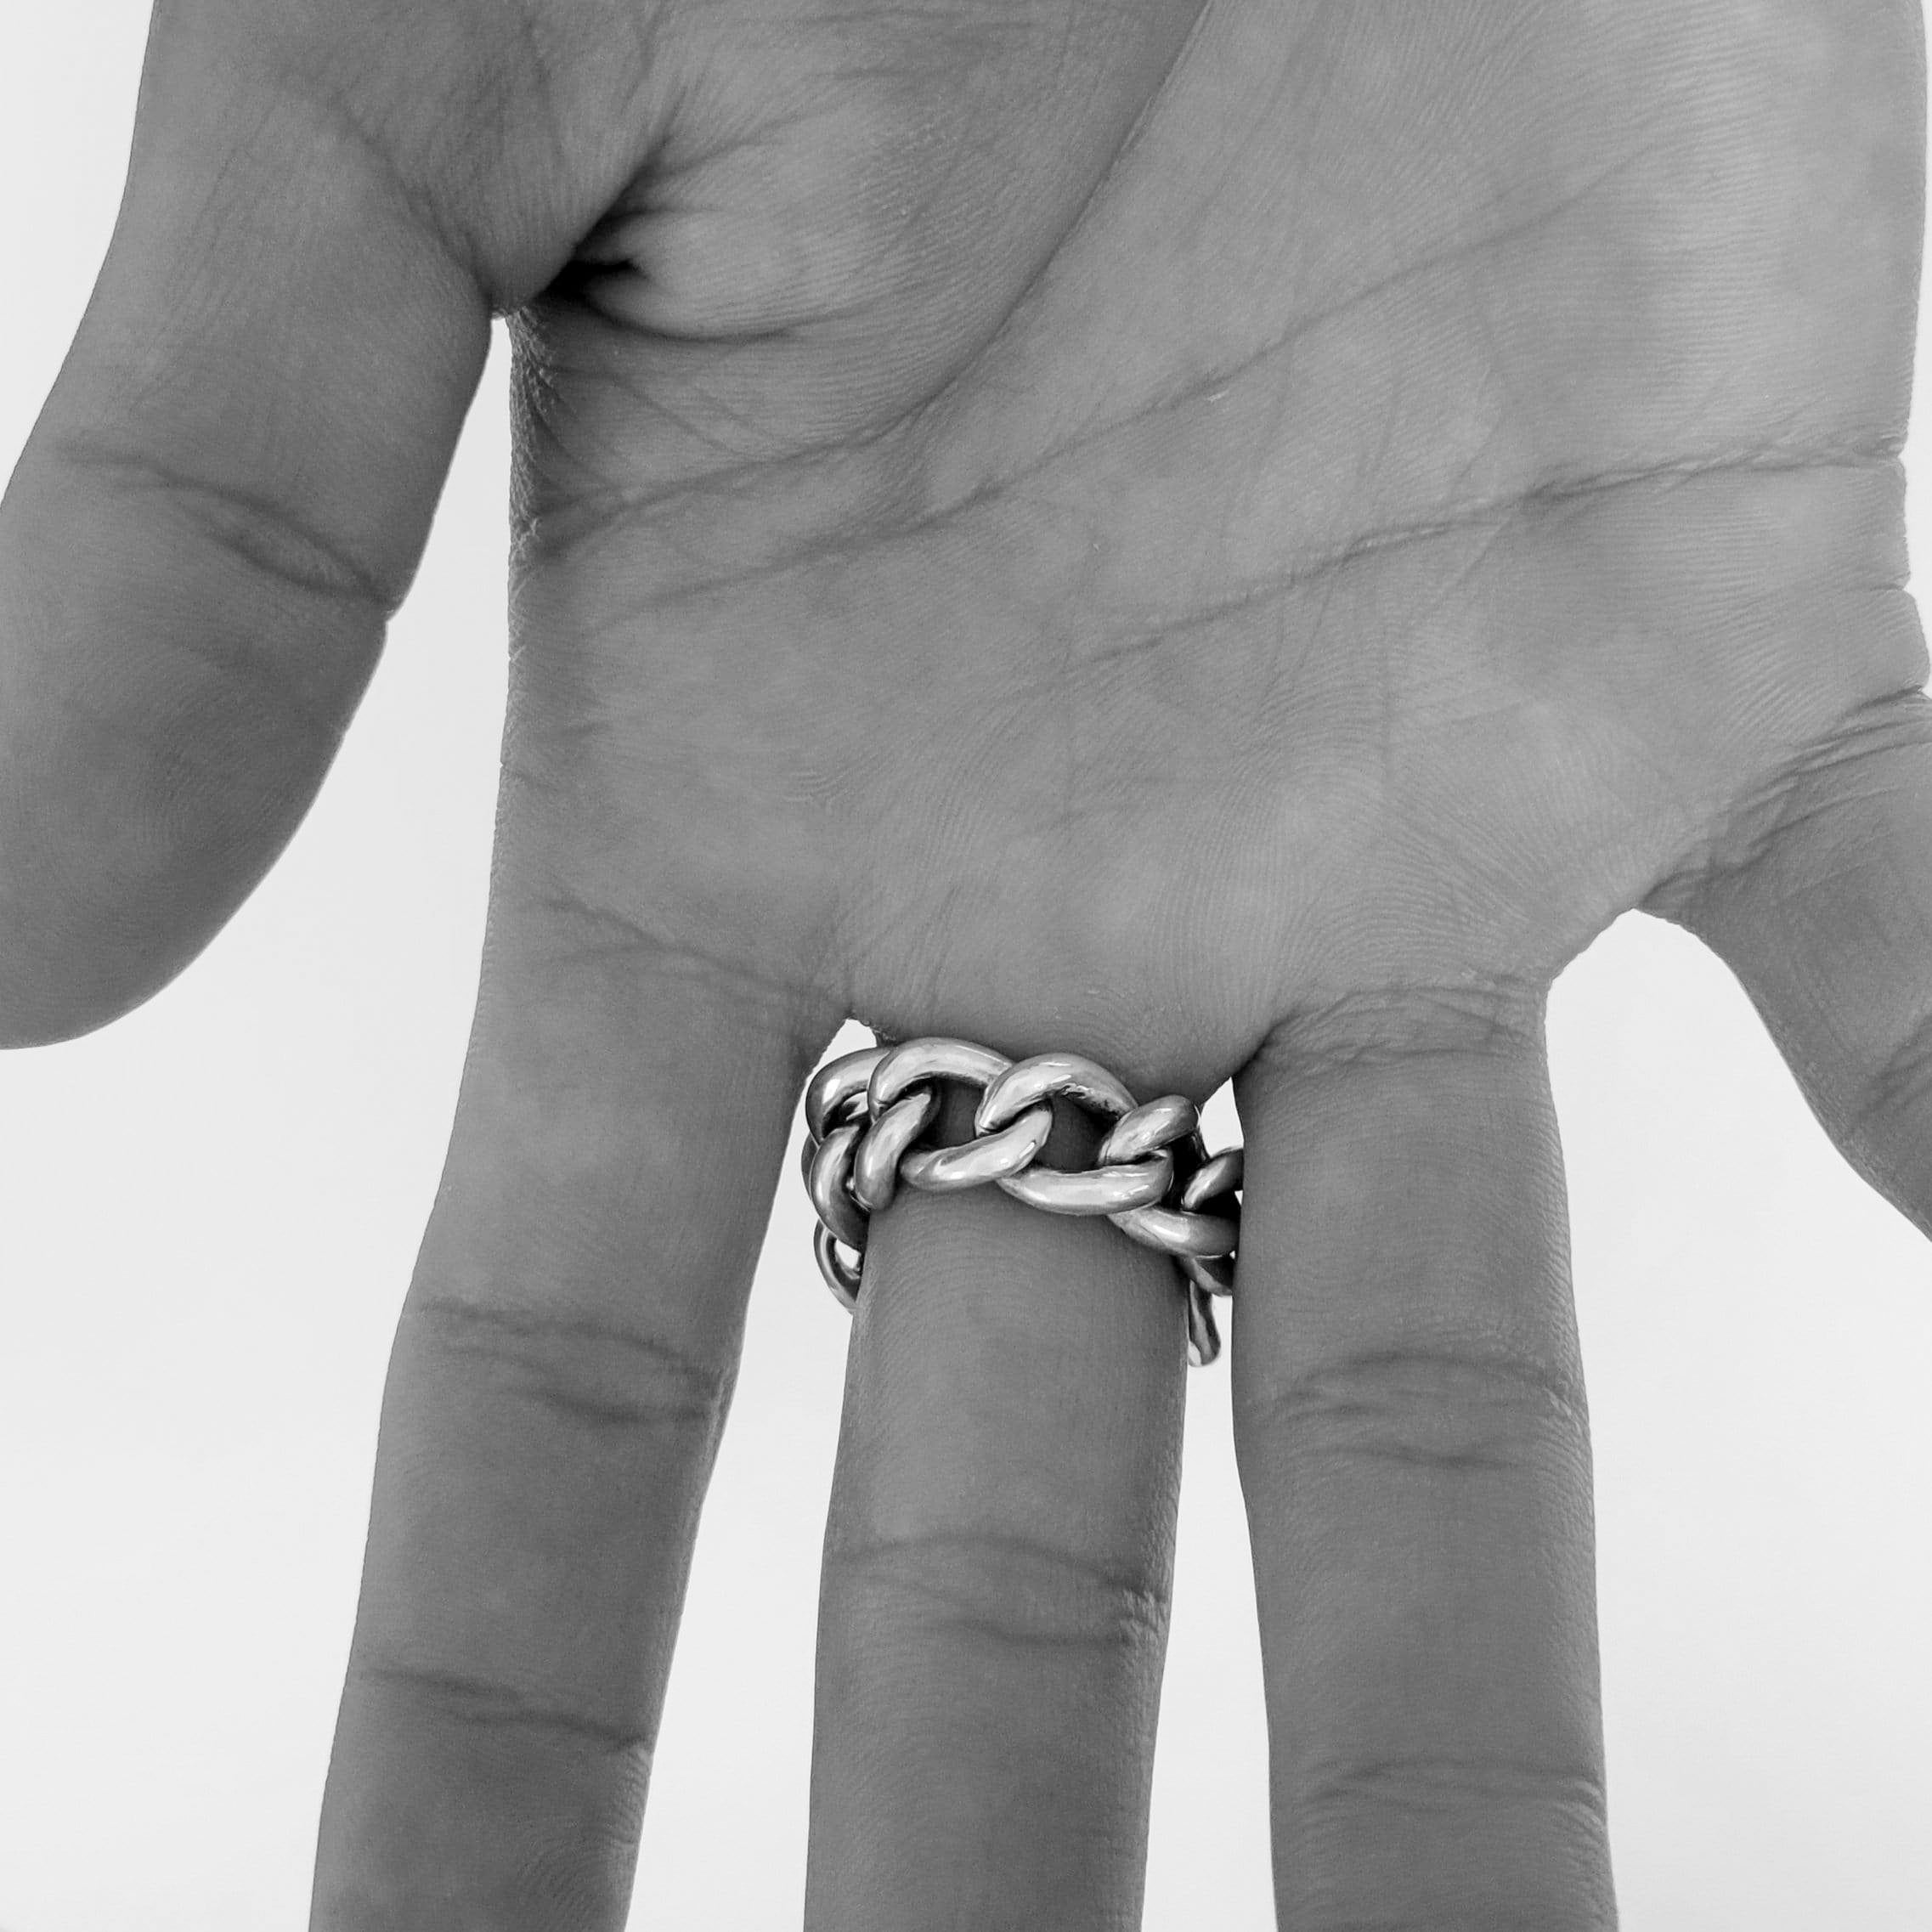 Solid Silver chain link ring on a male model hand focusing on chain links of the ring